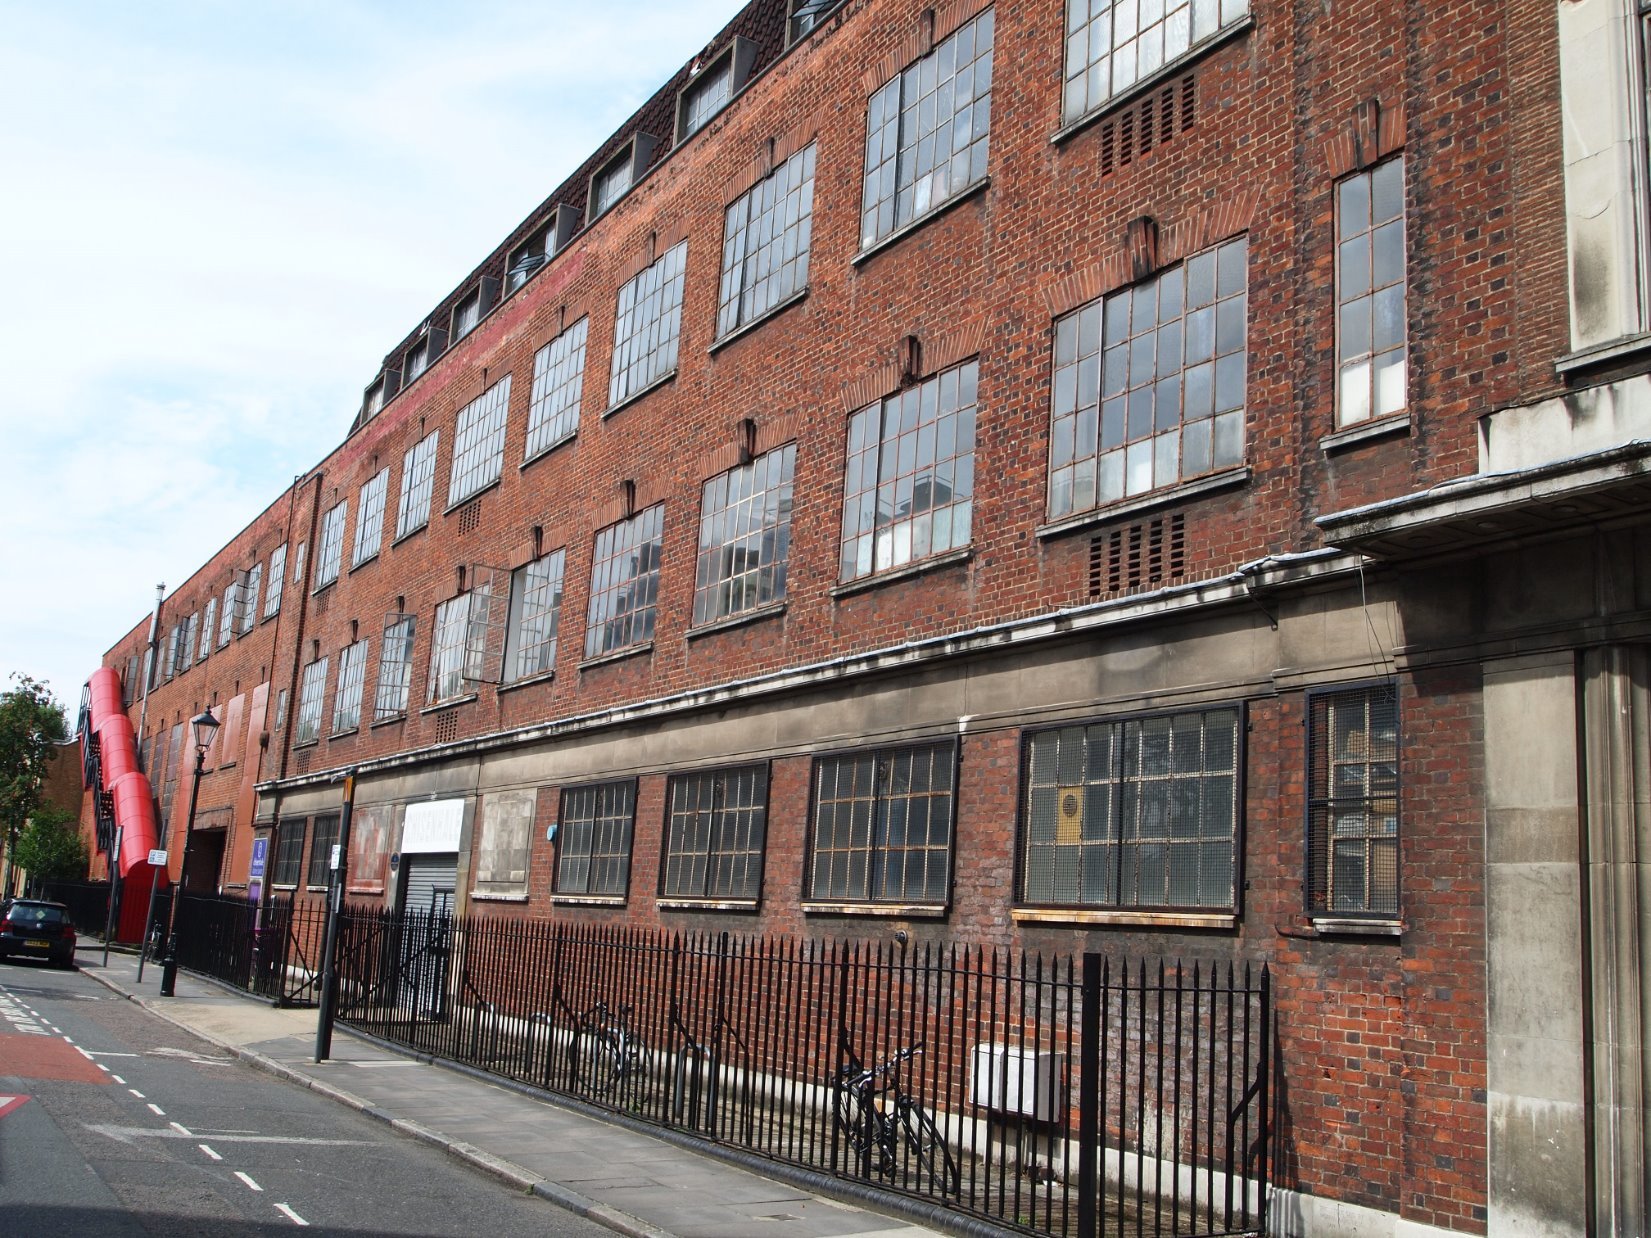 Artists Studios at Chisenhale Art Place, also offering public programmes for artists and community development.